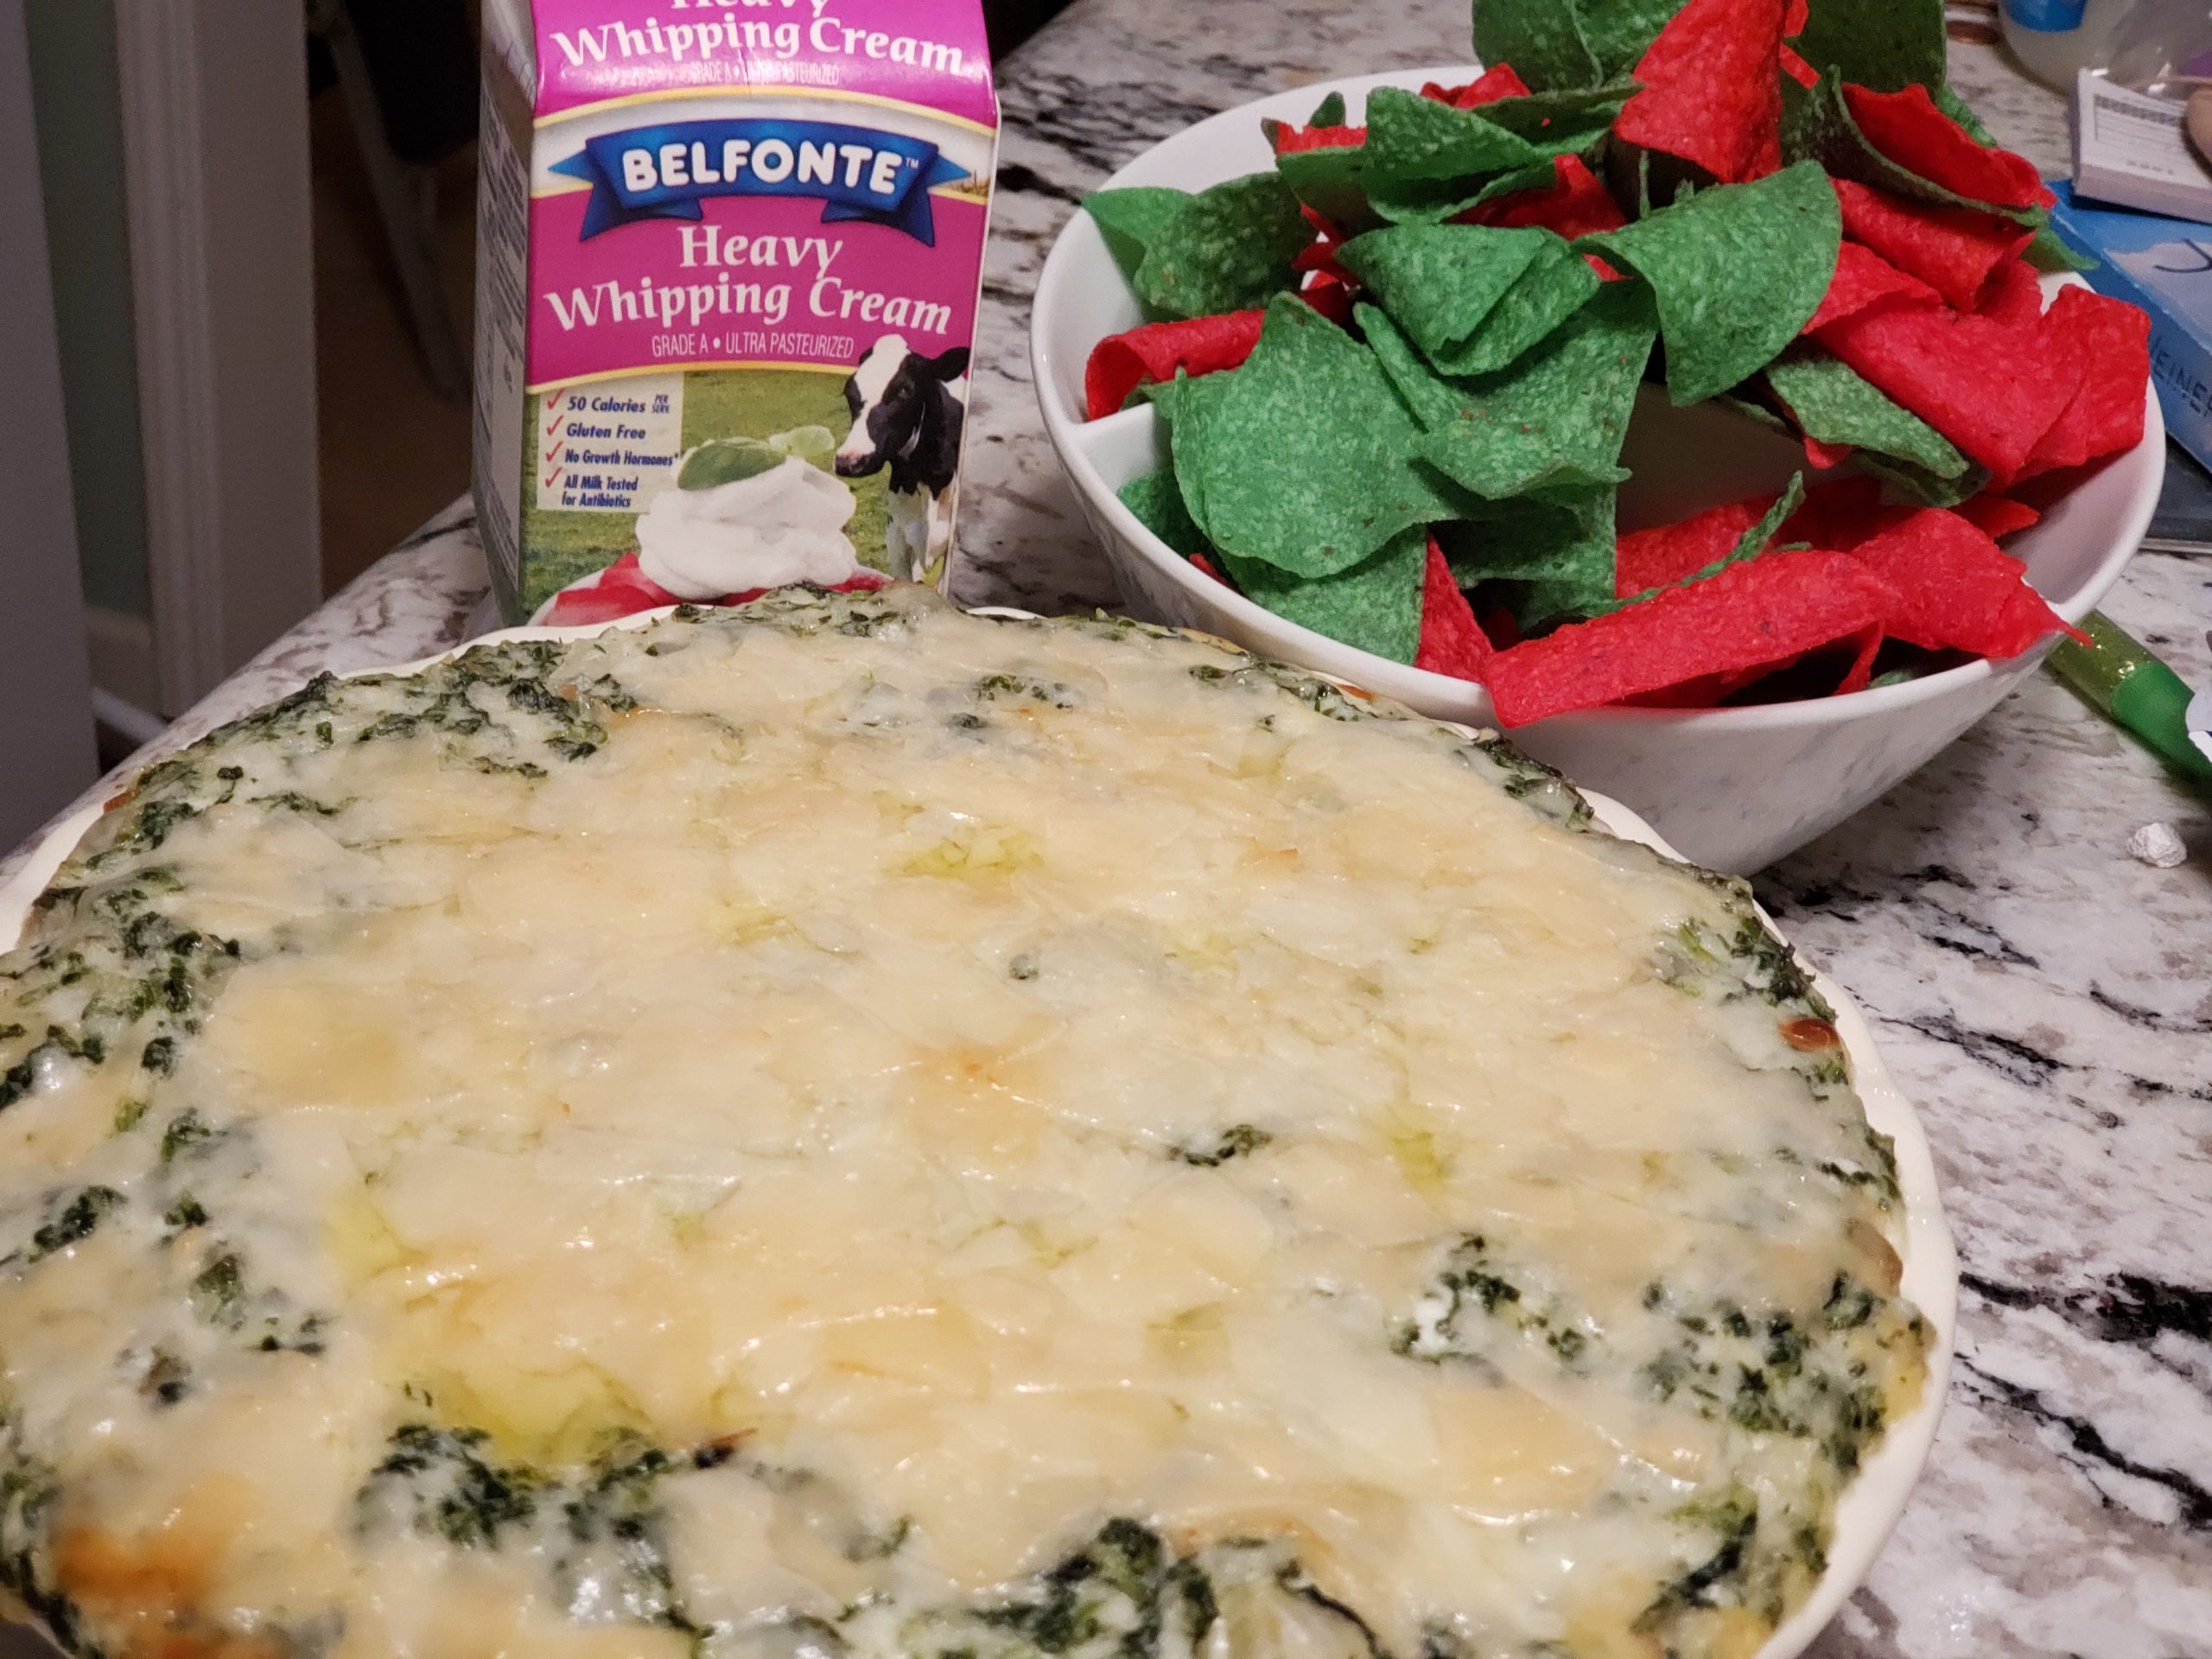 Creamy Spinach Artichoke Dip with Whipping Cream